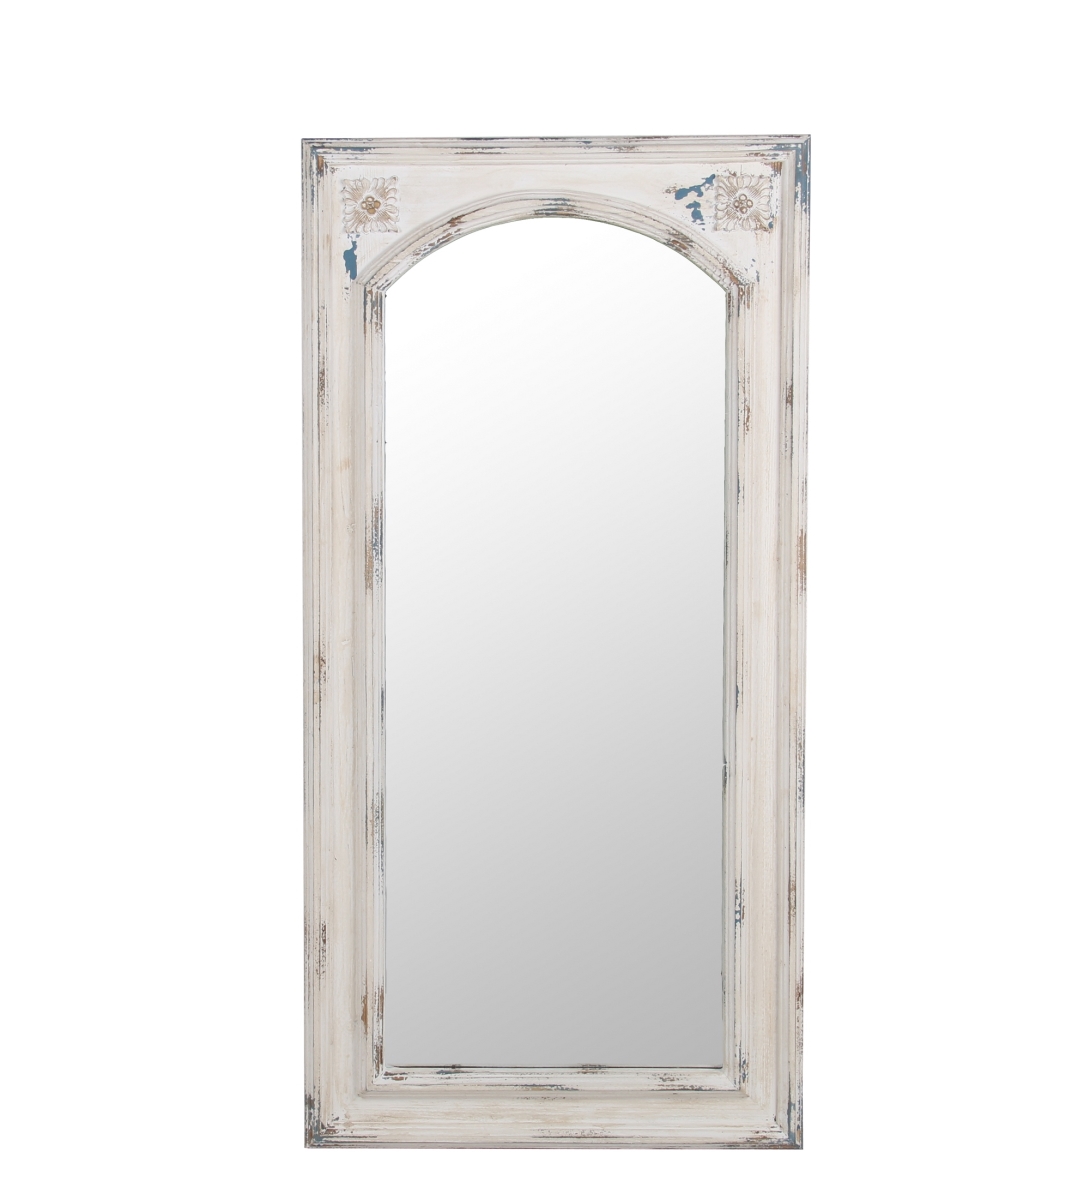 006-00002 22.5 X 1.5 X 45.5 In. Transitional Wood Wall Mirror, Antique White